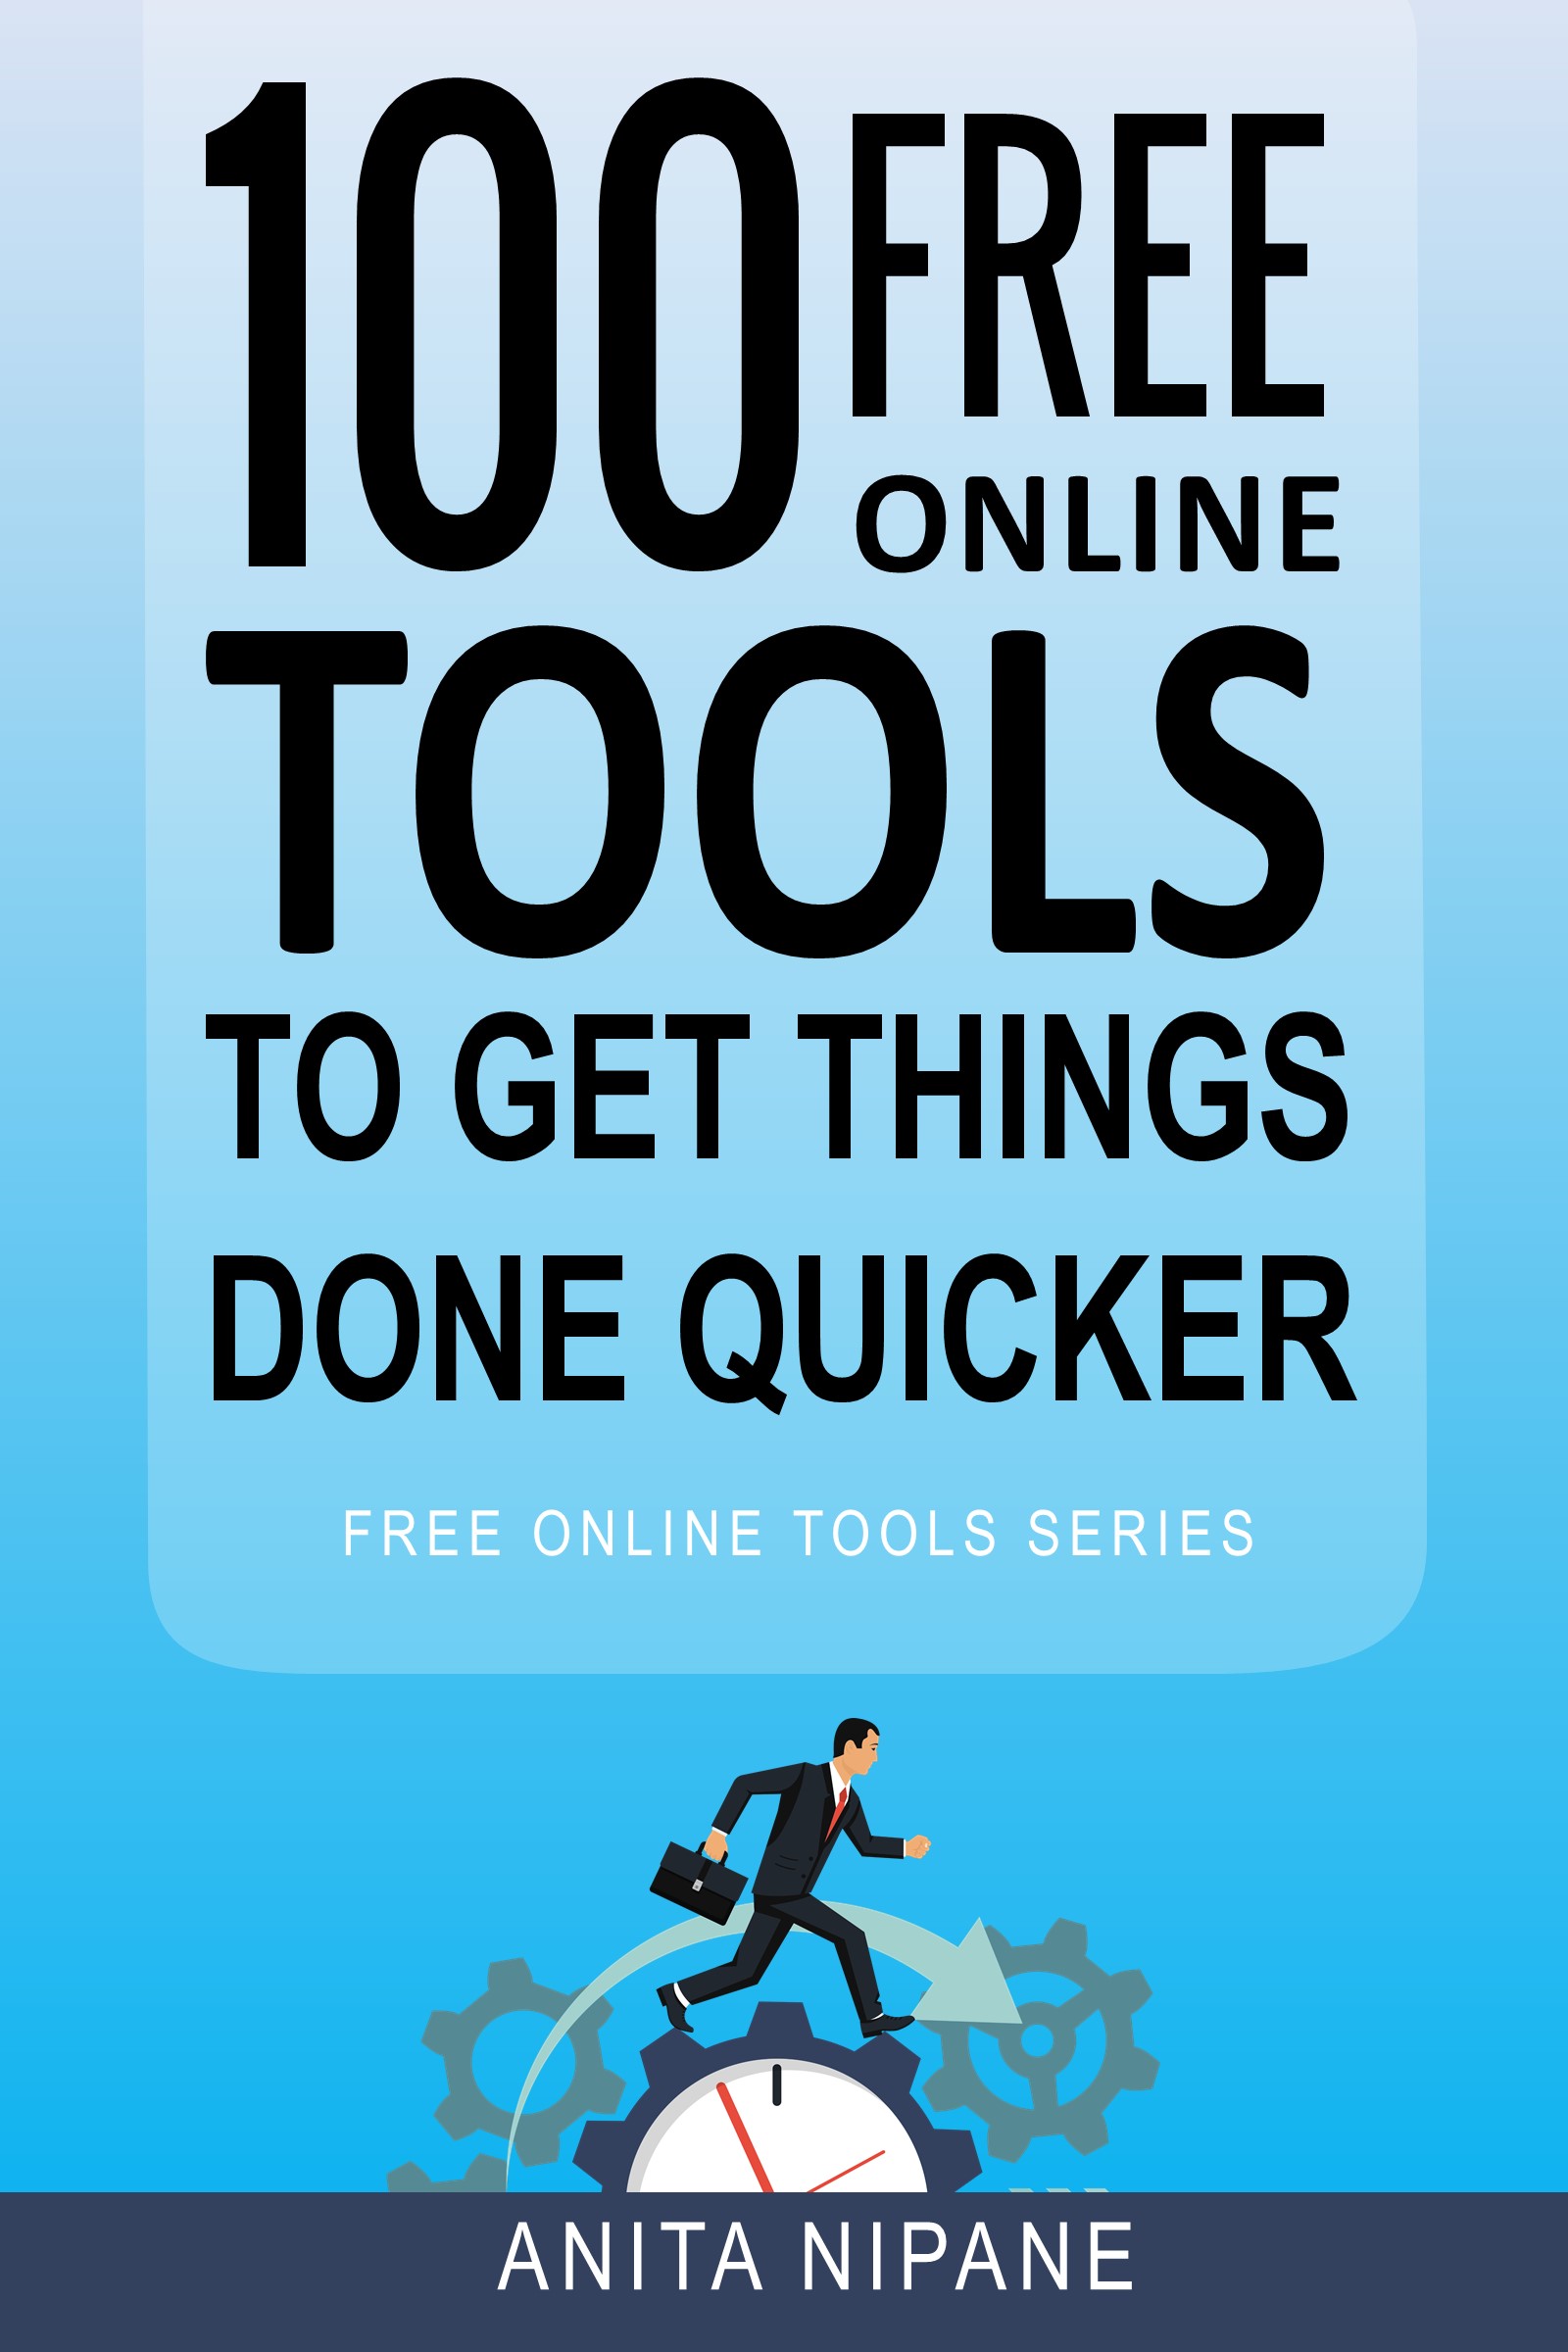 FREE: 100+ Free Online Tools to Get Things Done Quicker by Anita Nipane